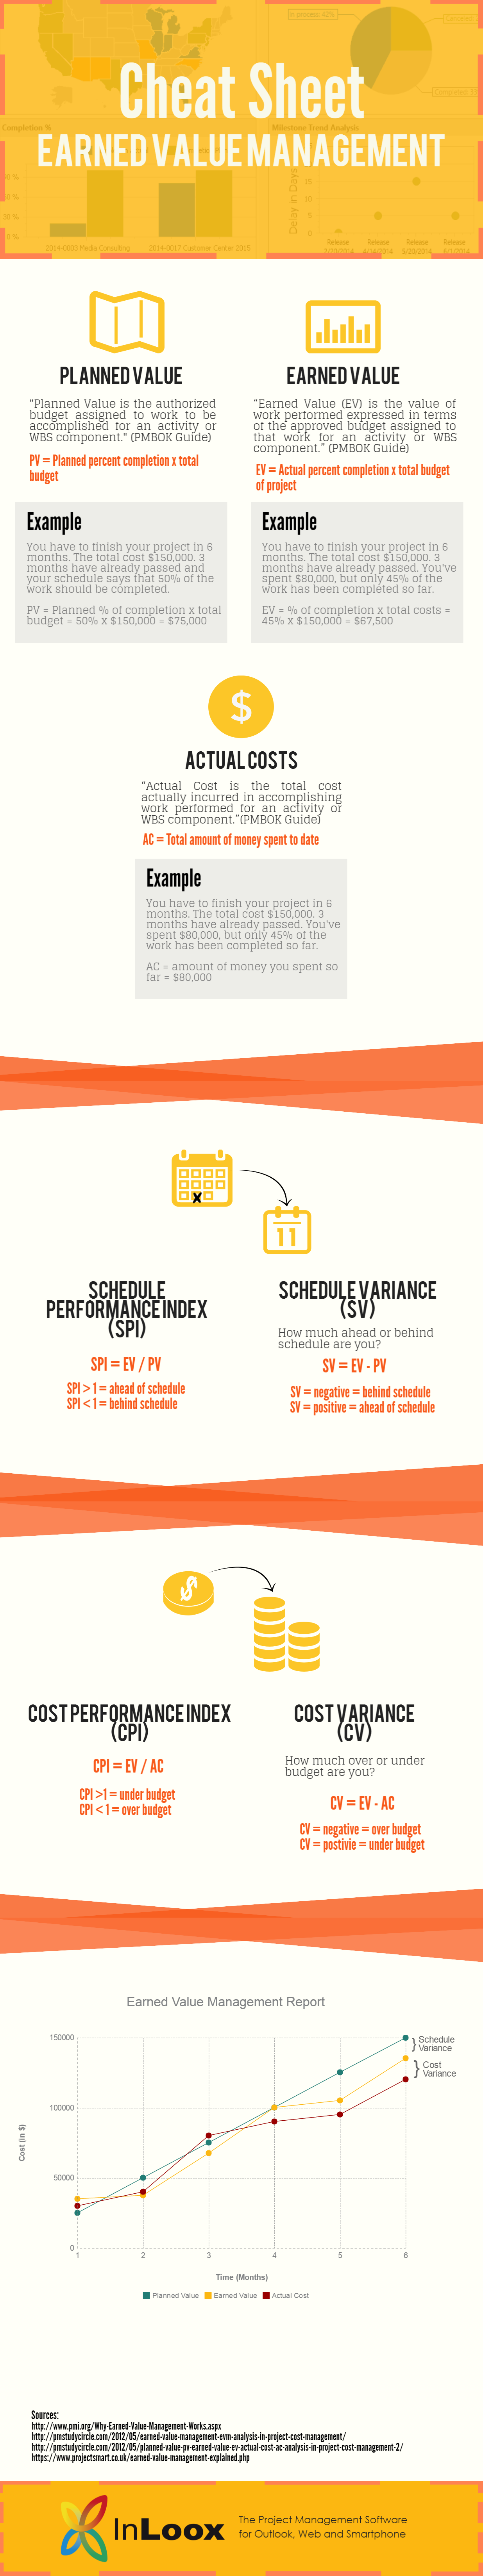 Infographic Cheat Sheet: Earned Value Management